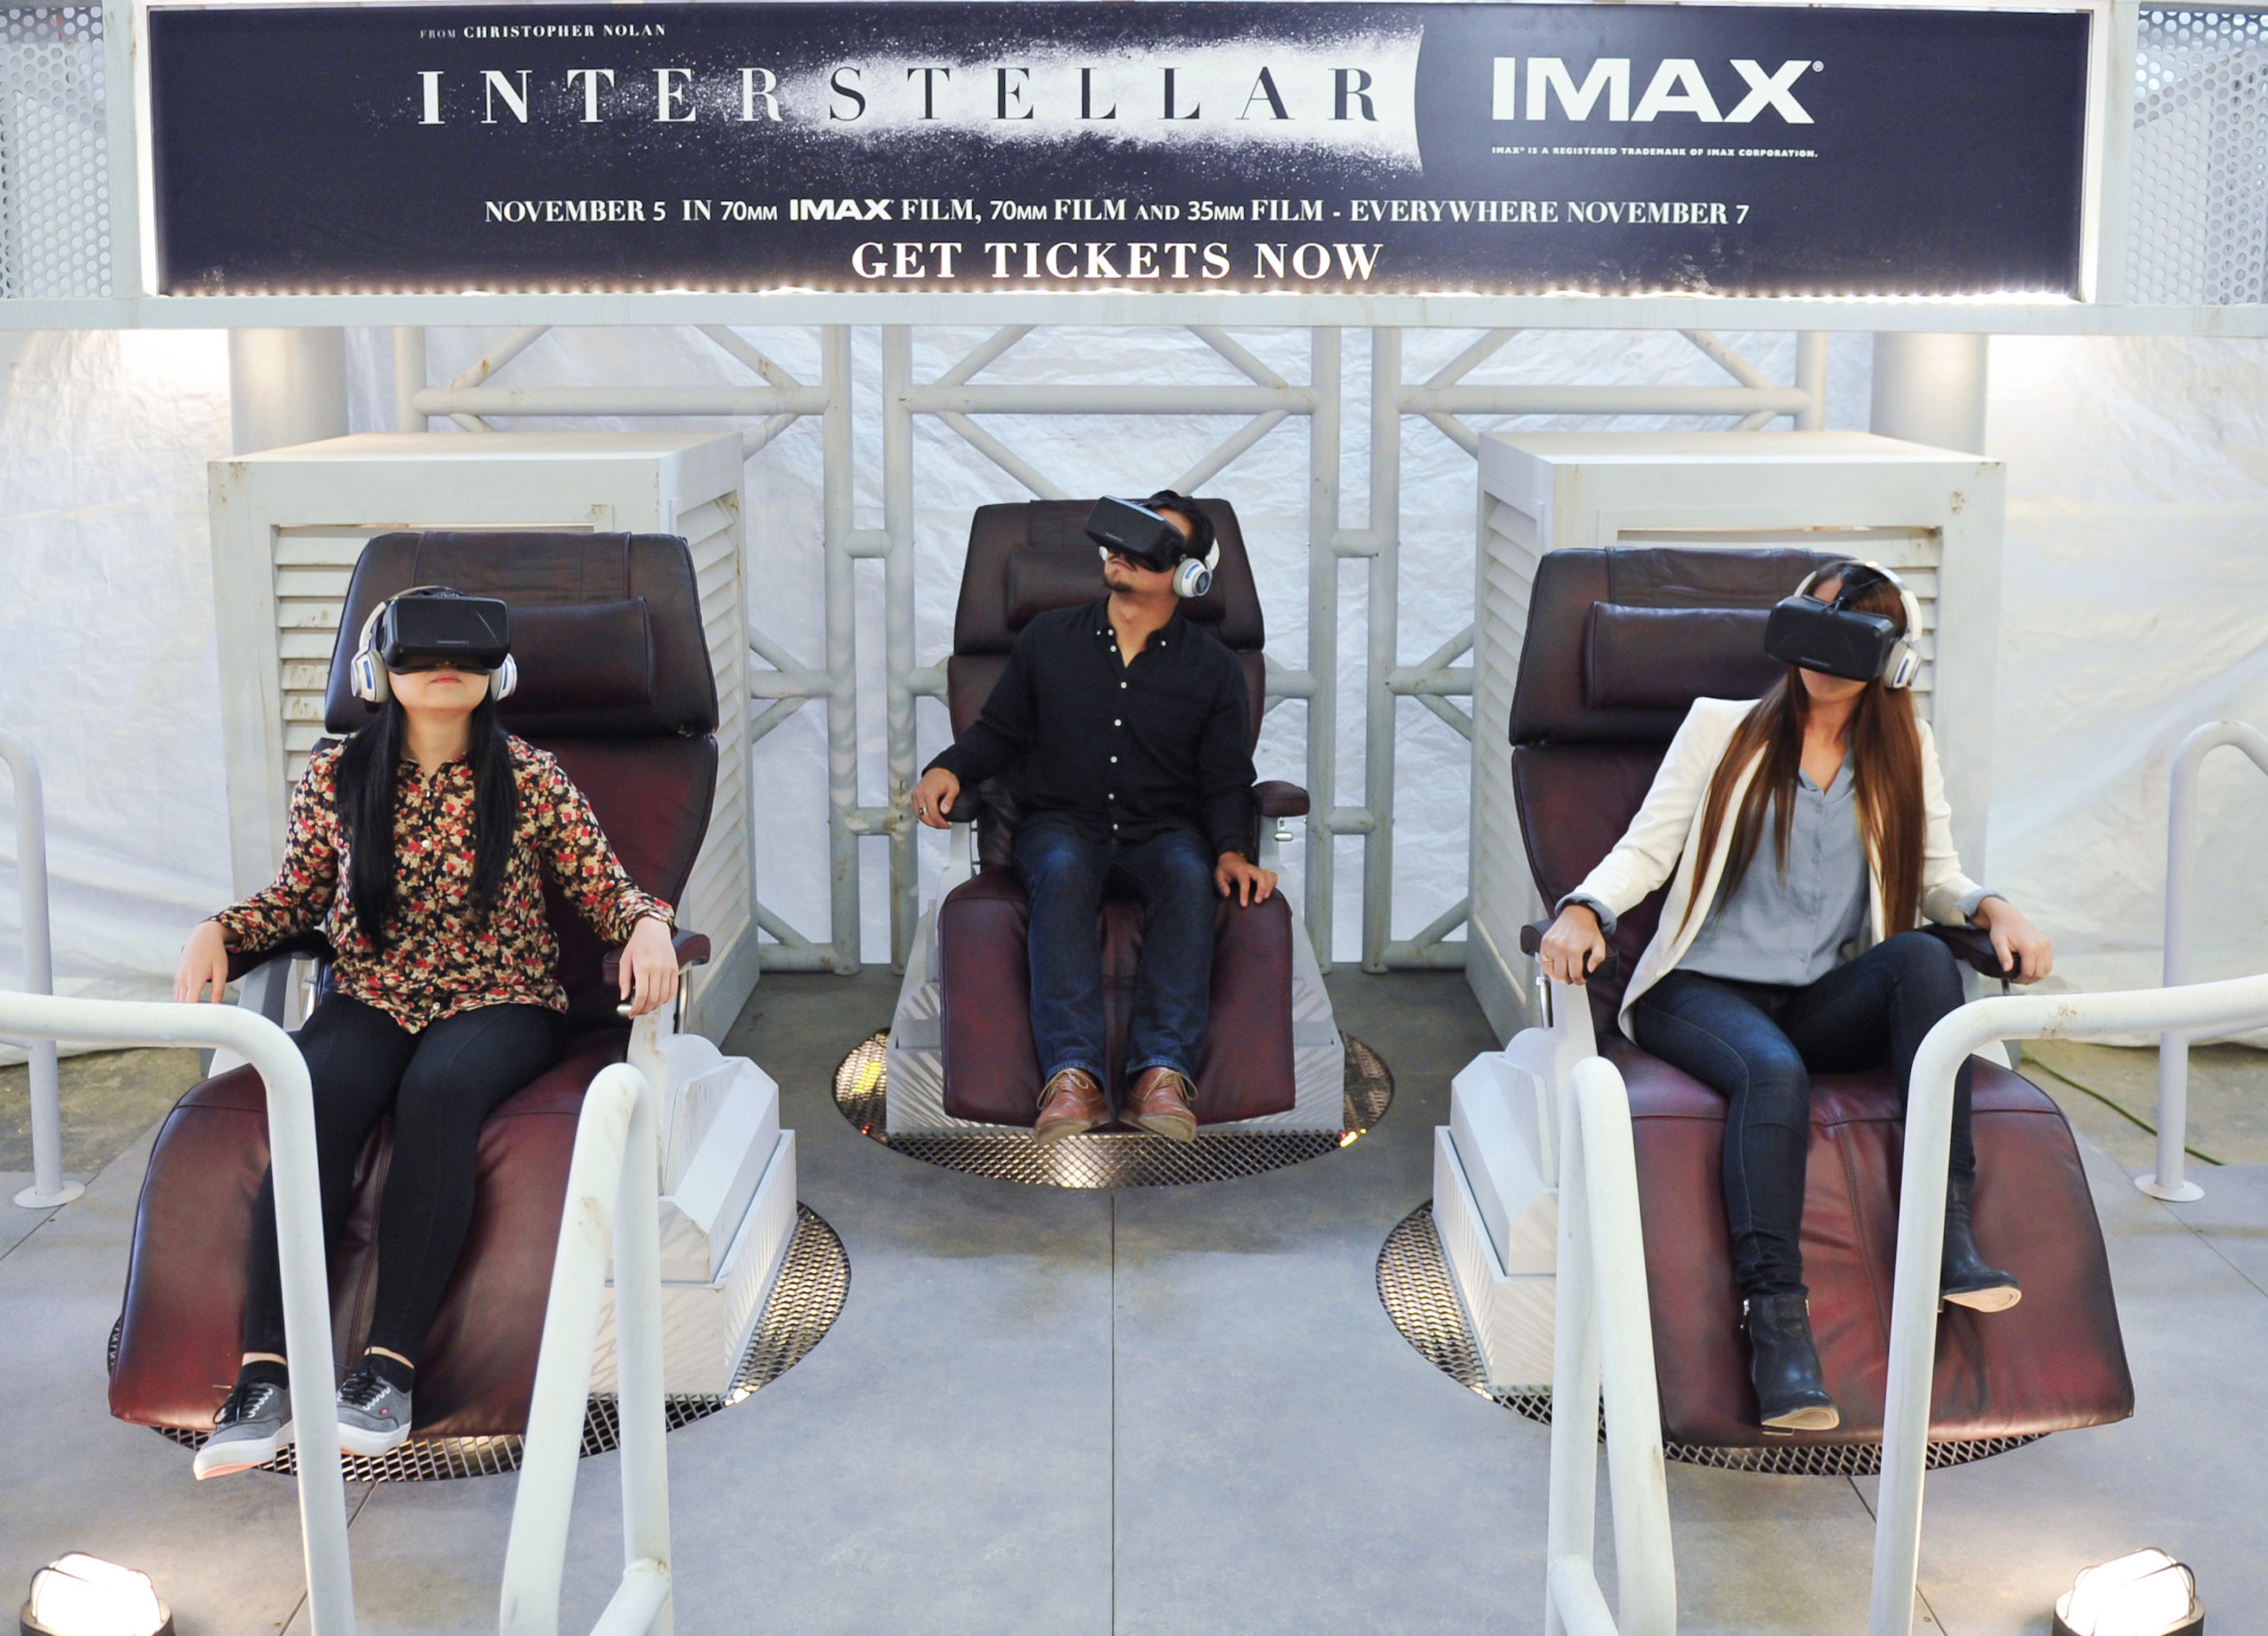 Oculus Rift Took Me Inside Interstellar, And I Wanted To Stay There